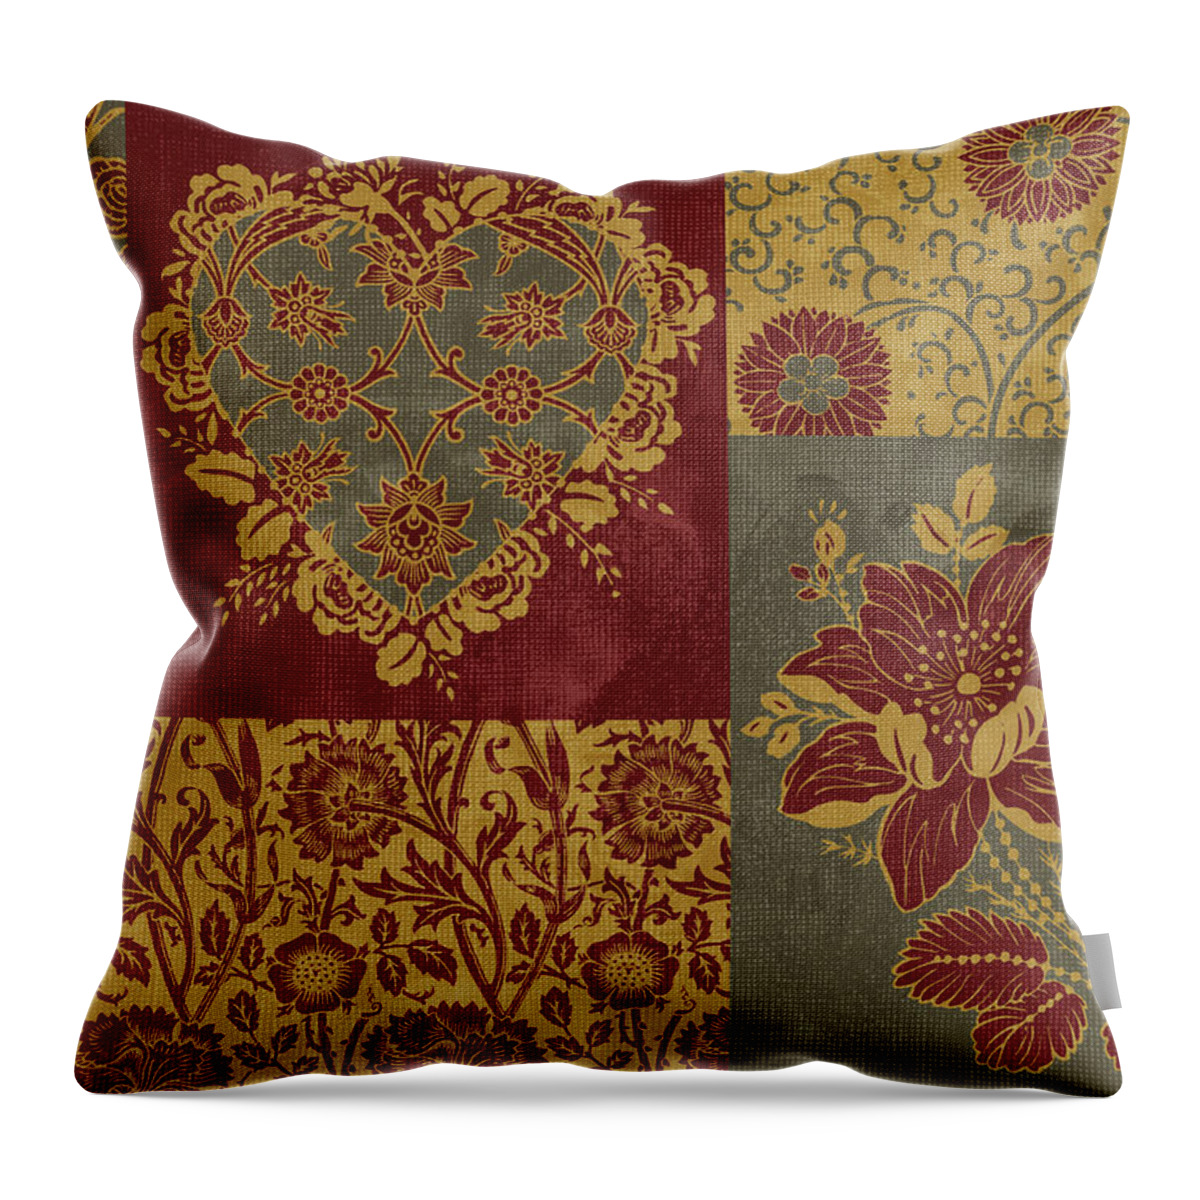 Heart Throw Pillow featuring the painting Deco Heart Earthtones by JQ Licensing